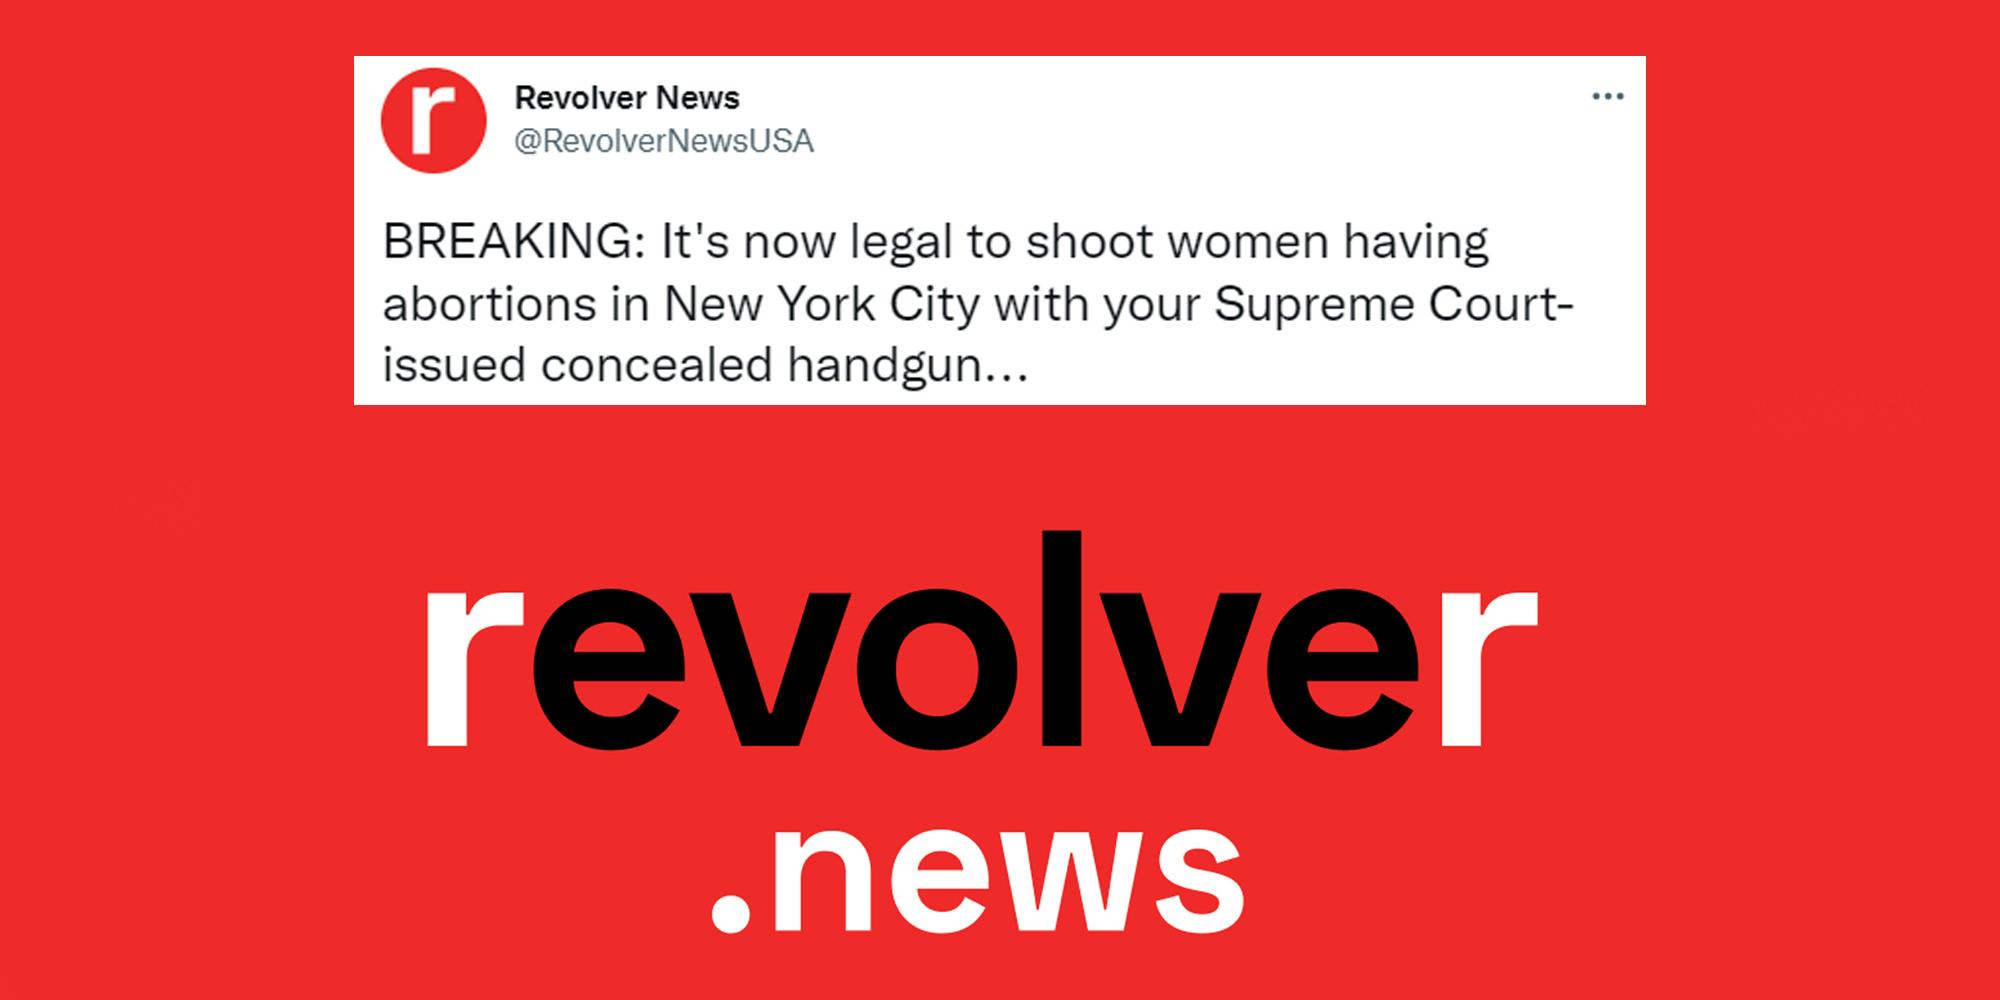 red background with tweet by revolver . news centered top caption "BREAKING : It's now legal to shoot women having abortions in New York City with your Supreme Court- issued concealed handgun" revolver . news logo below centered